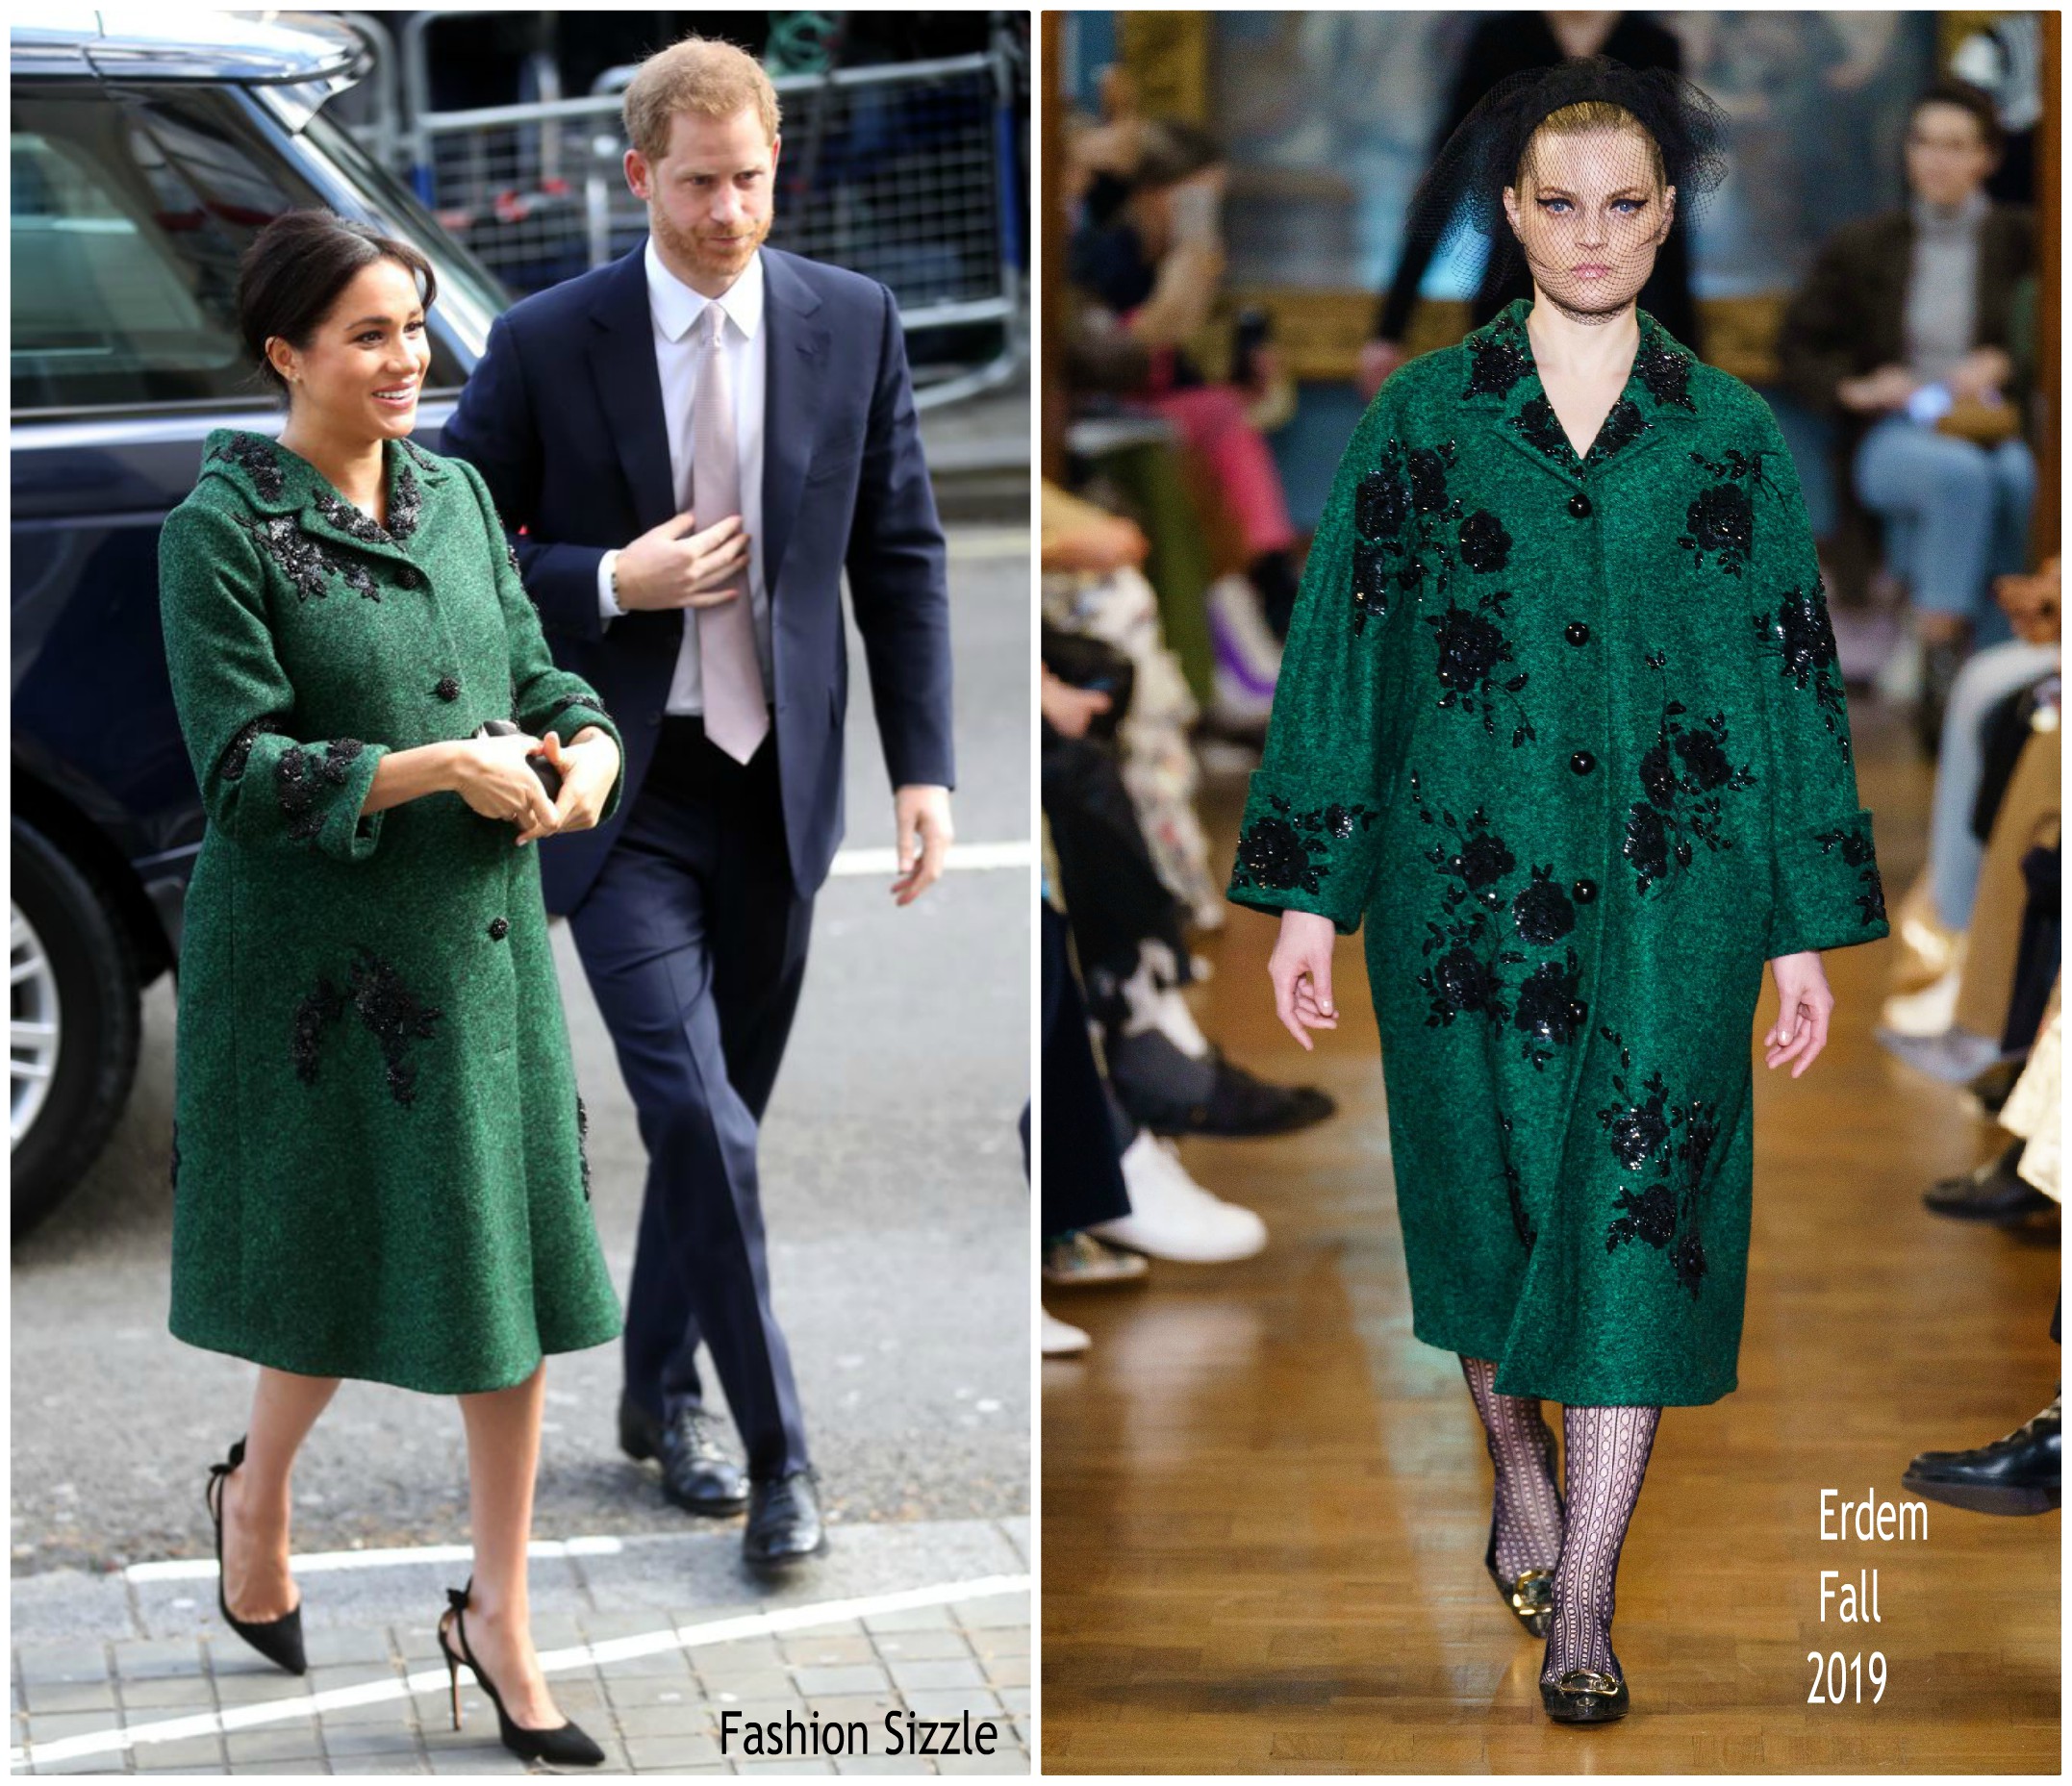 meghan-duchess-of-sussex-in-erdem-commonwealth-day-youth-event